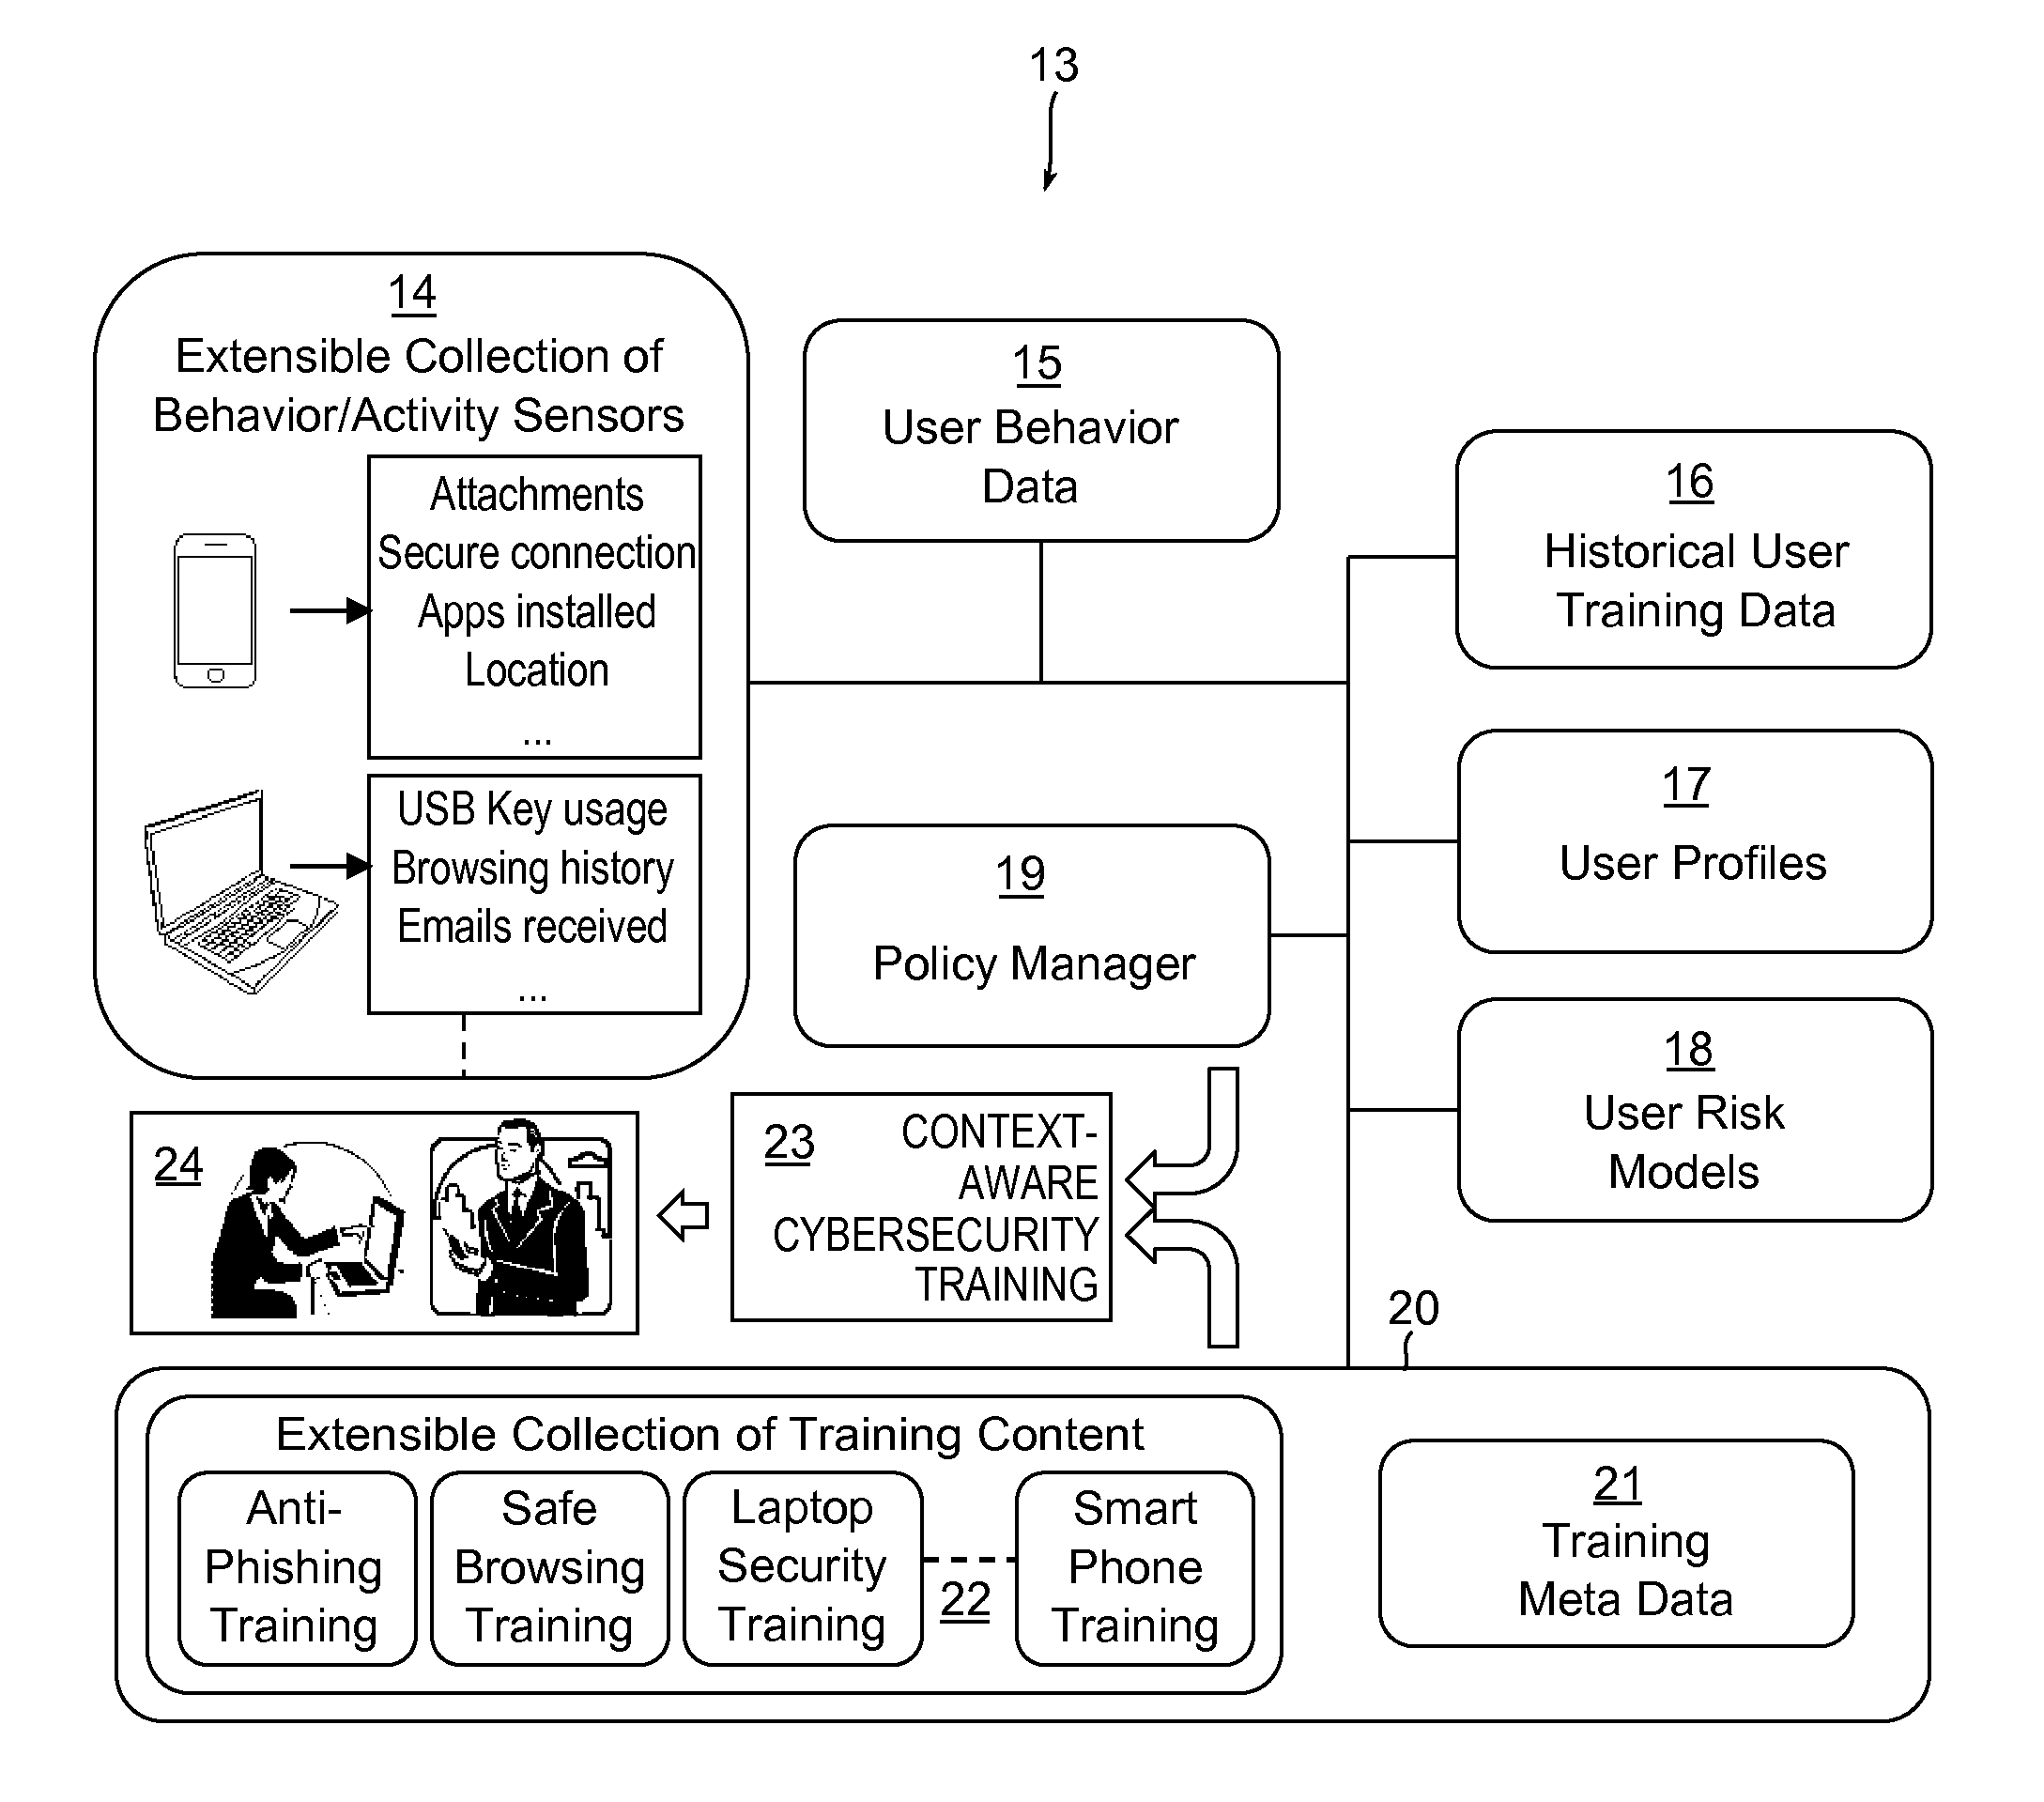 Context-aware training systems, apparatuses, and methods